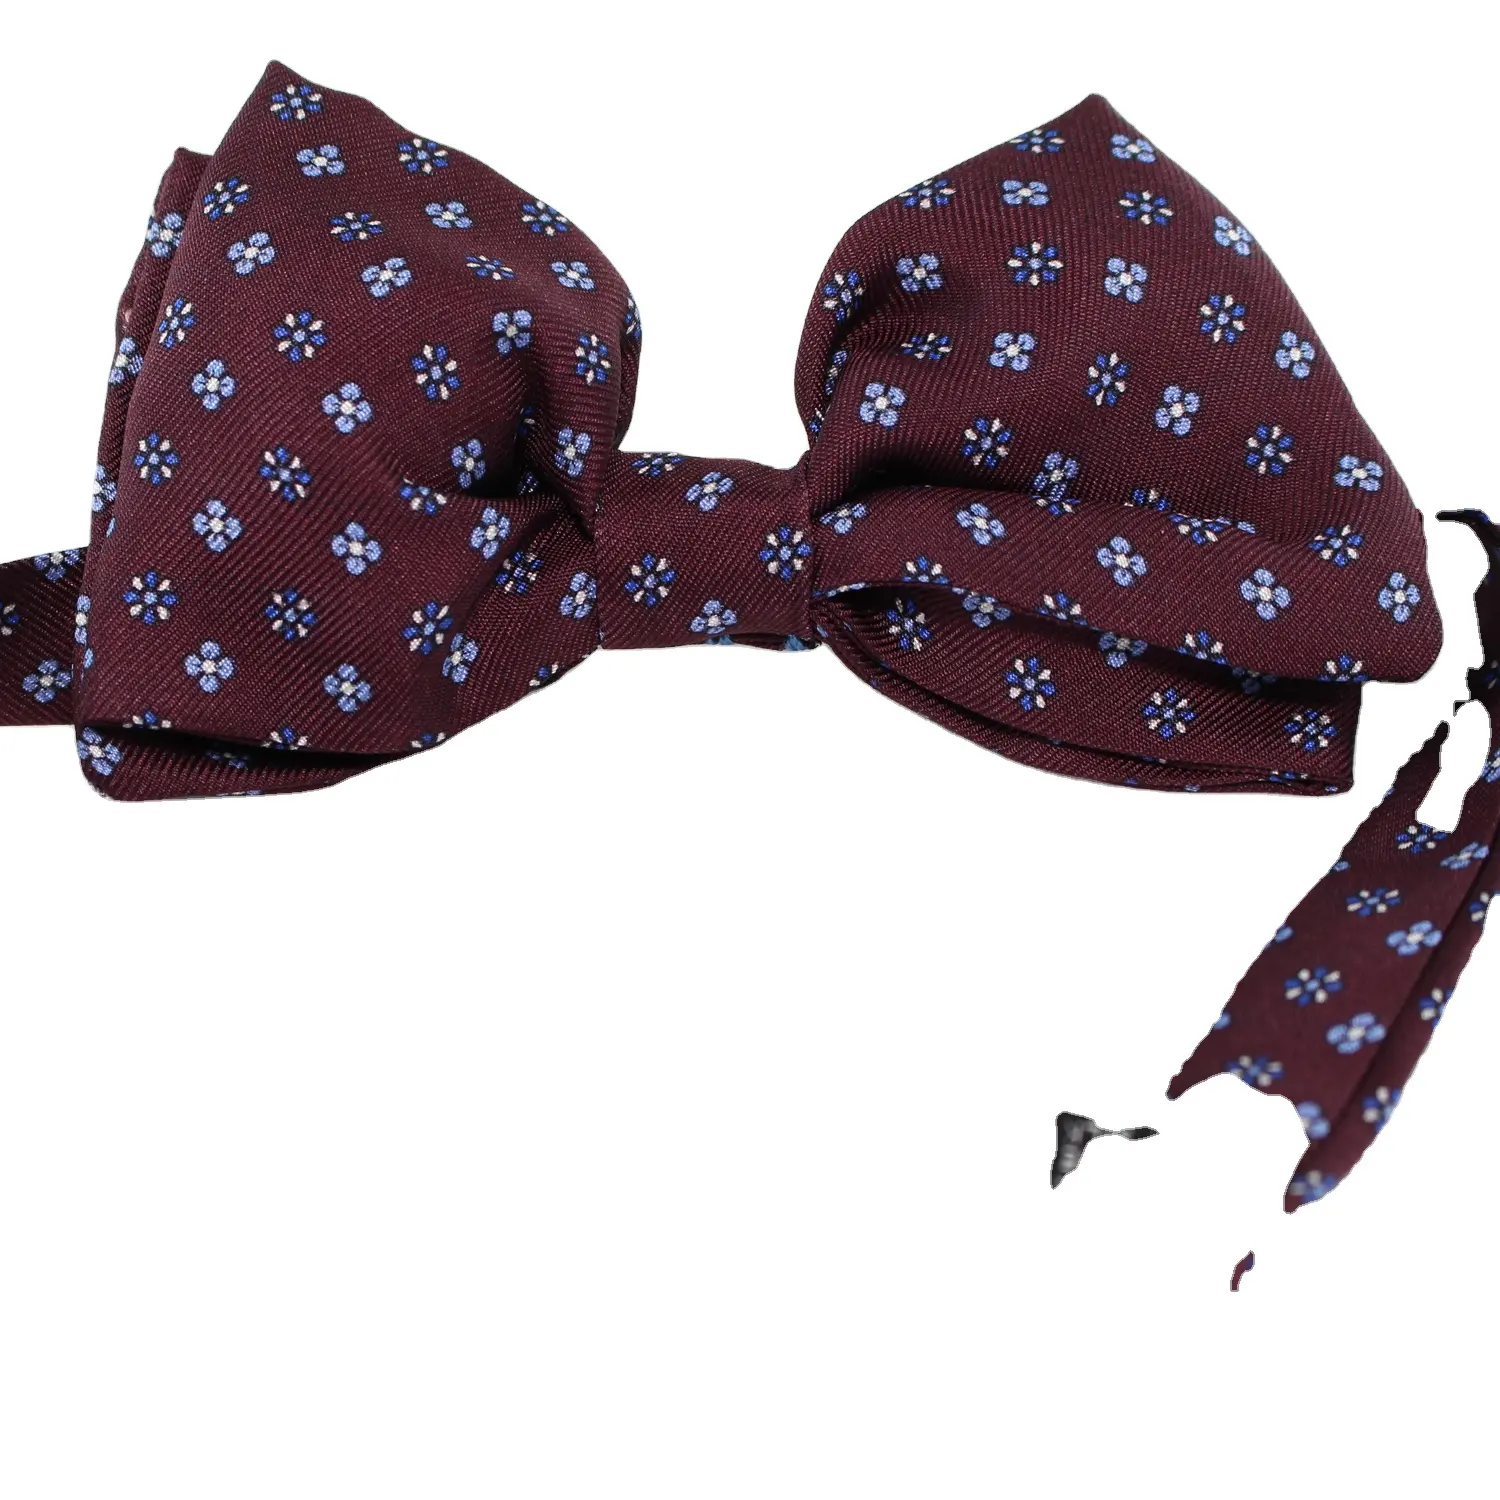 Bow tie handmade in Italy with silk twill, luxury fabric and high quality tailoring